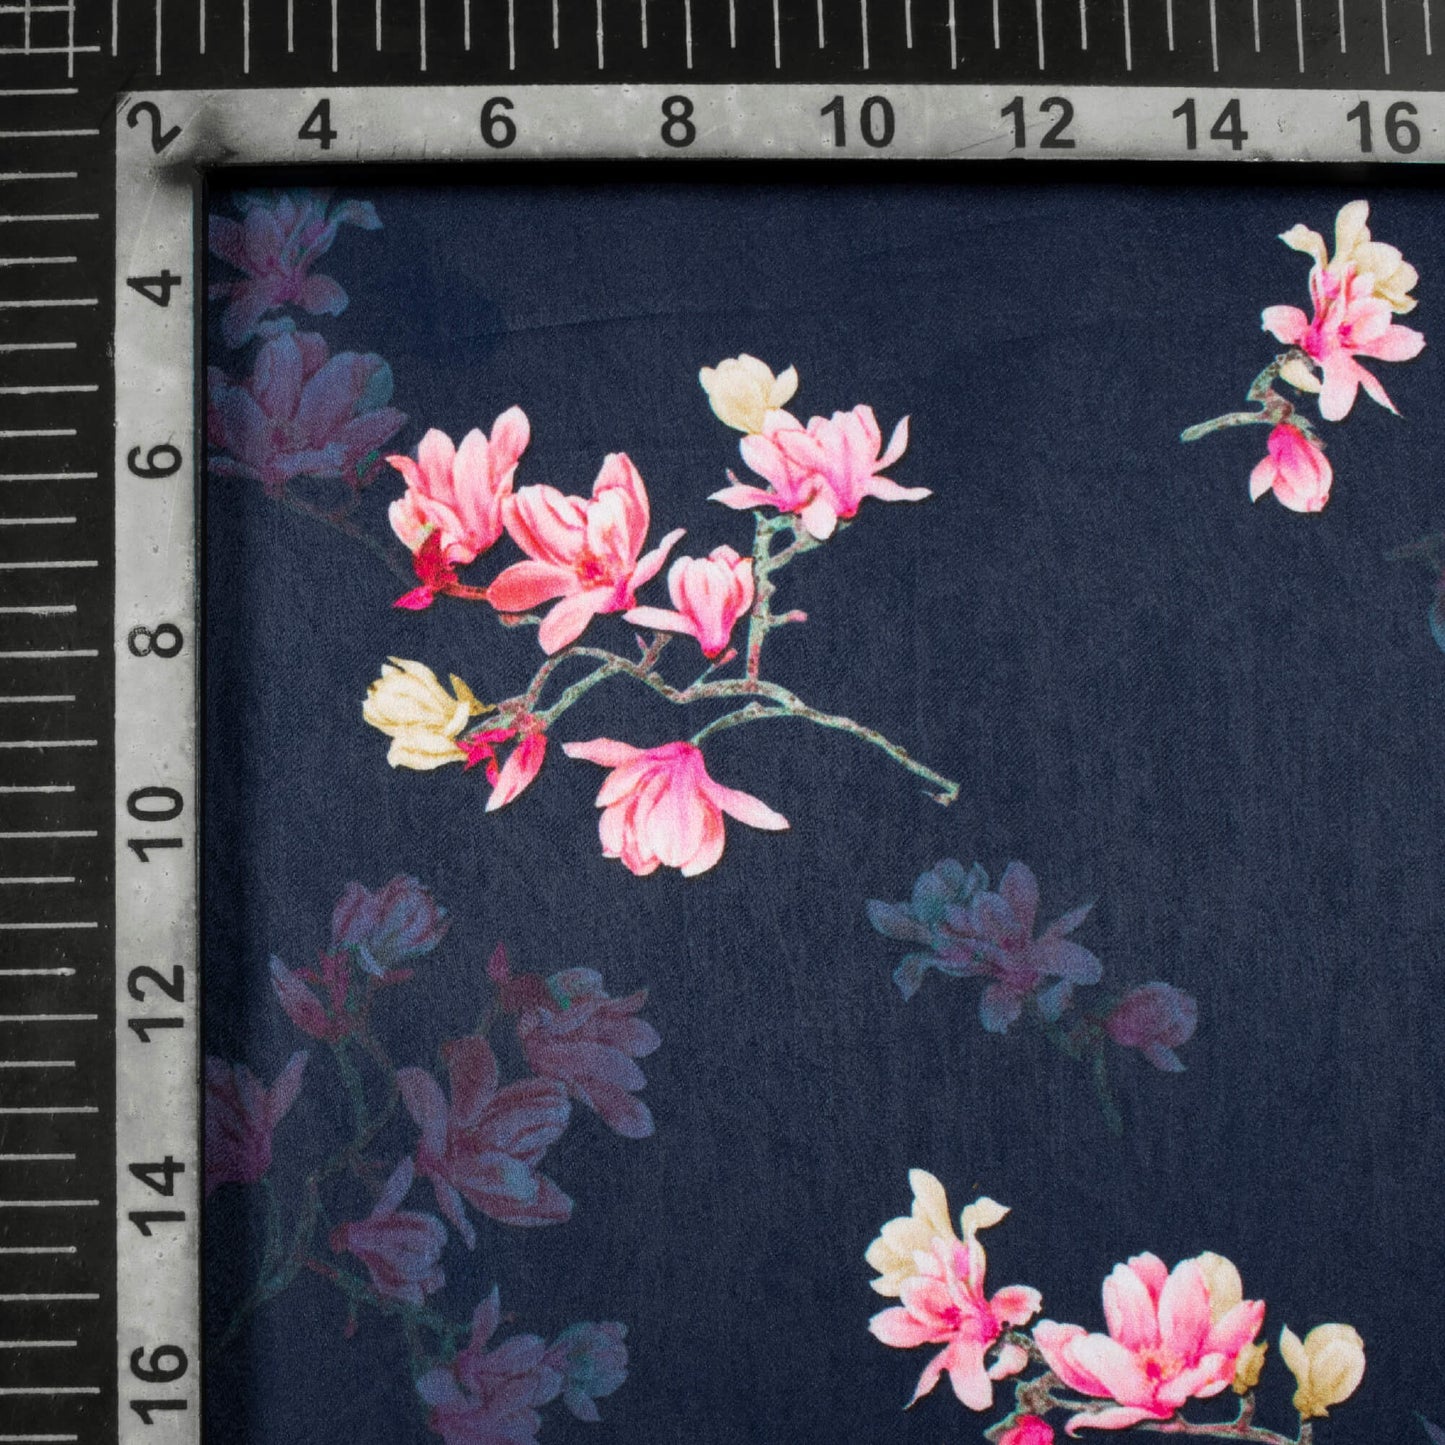 Space Blue And Pink Floral Pattern Digital Print Lush Satin Fabric